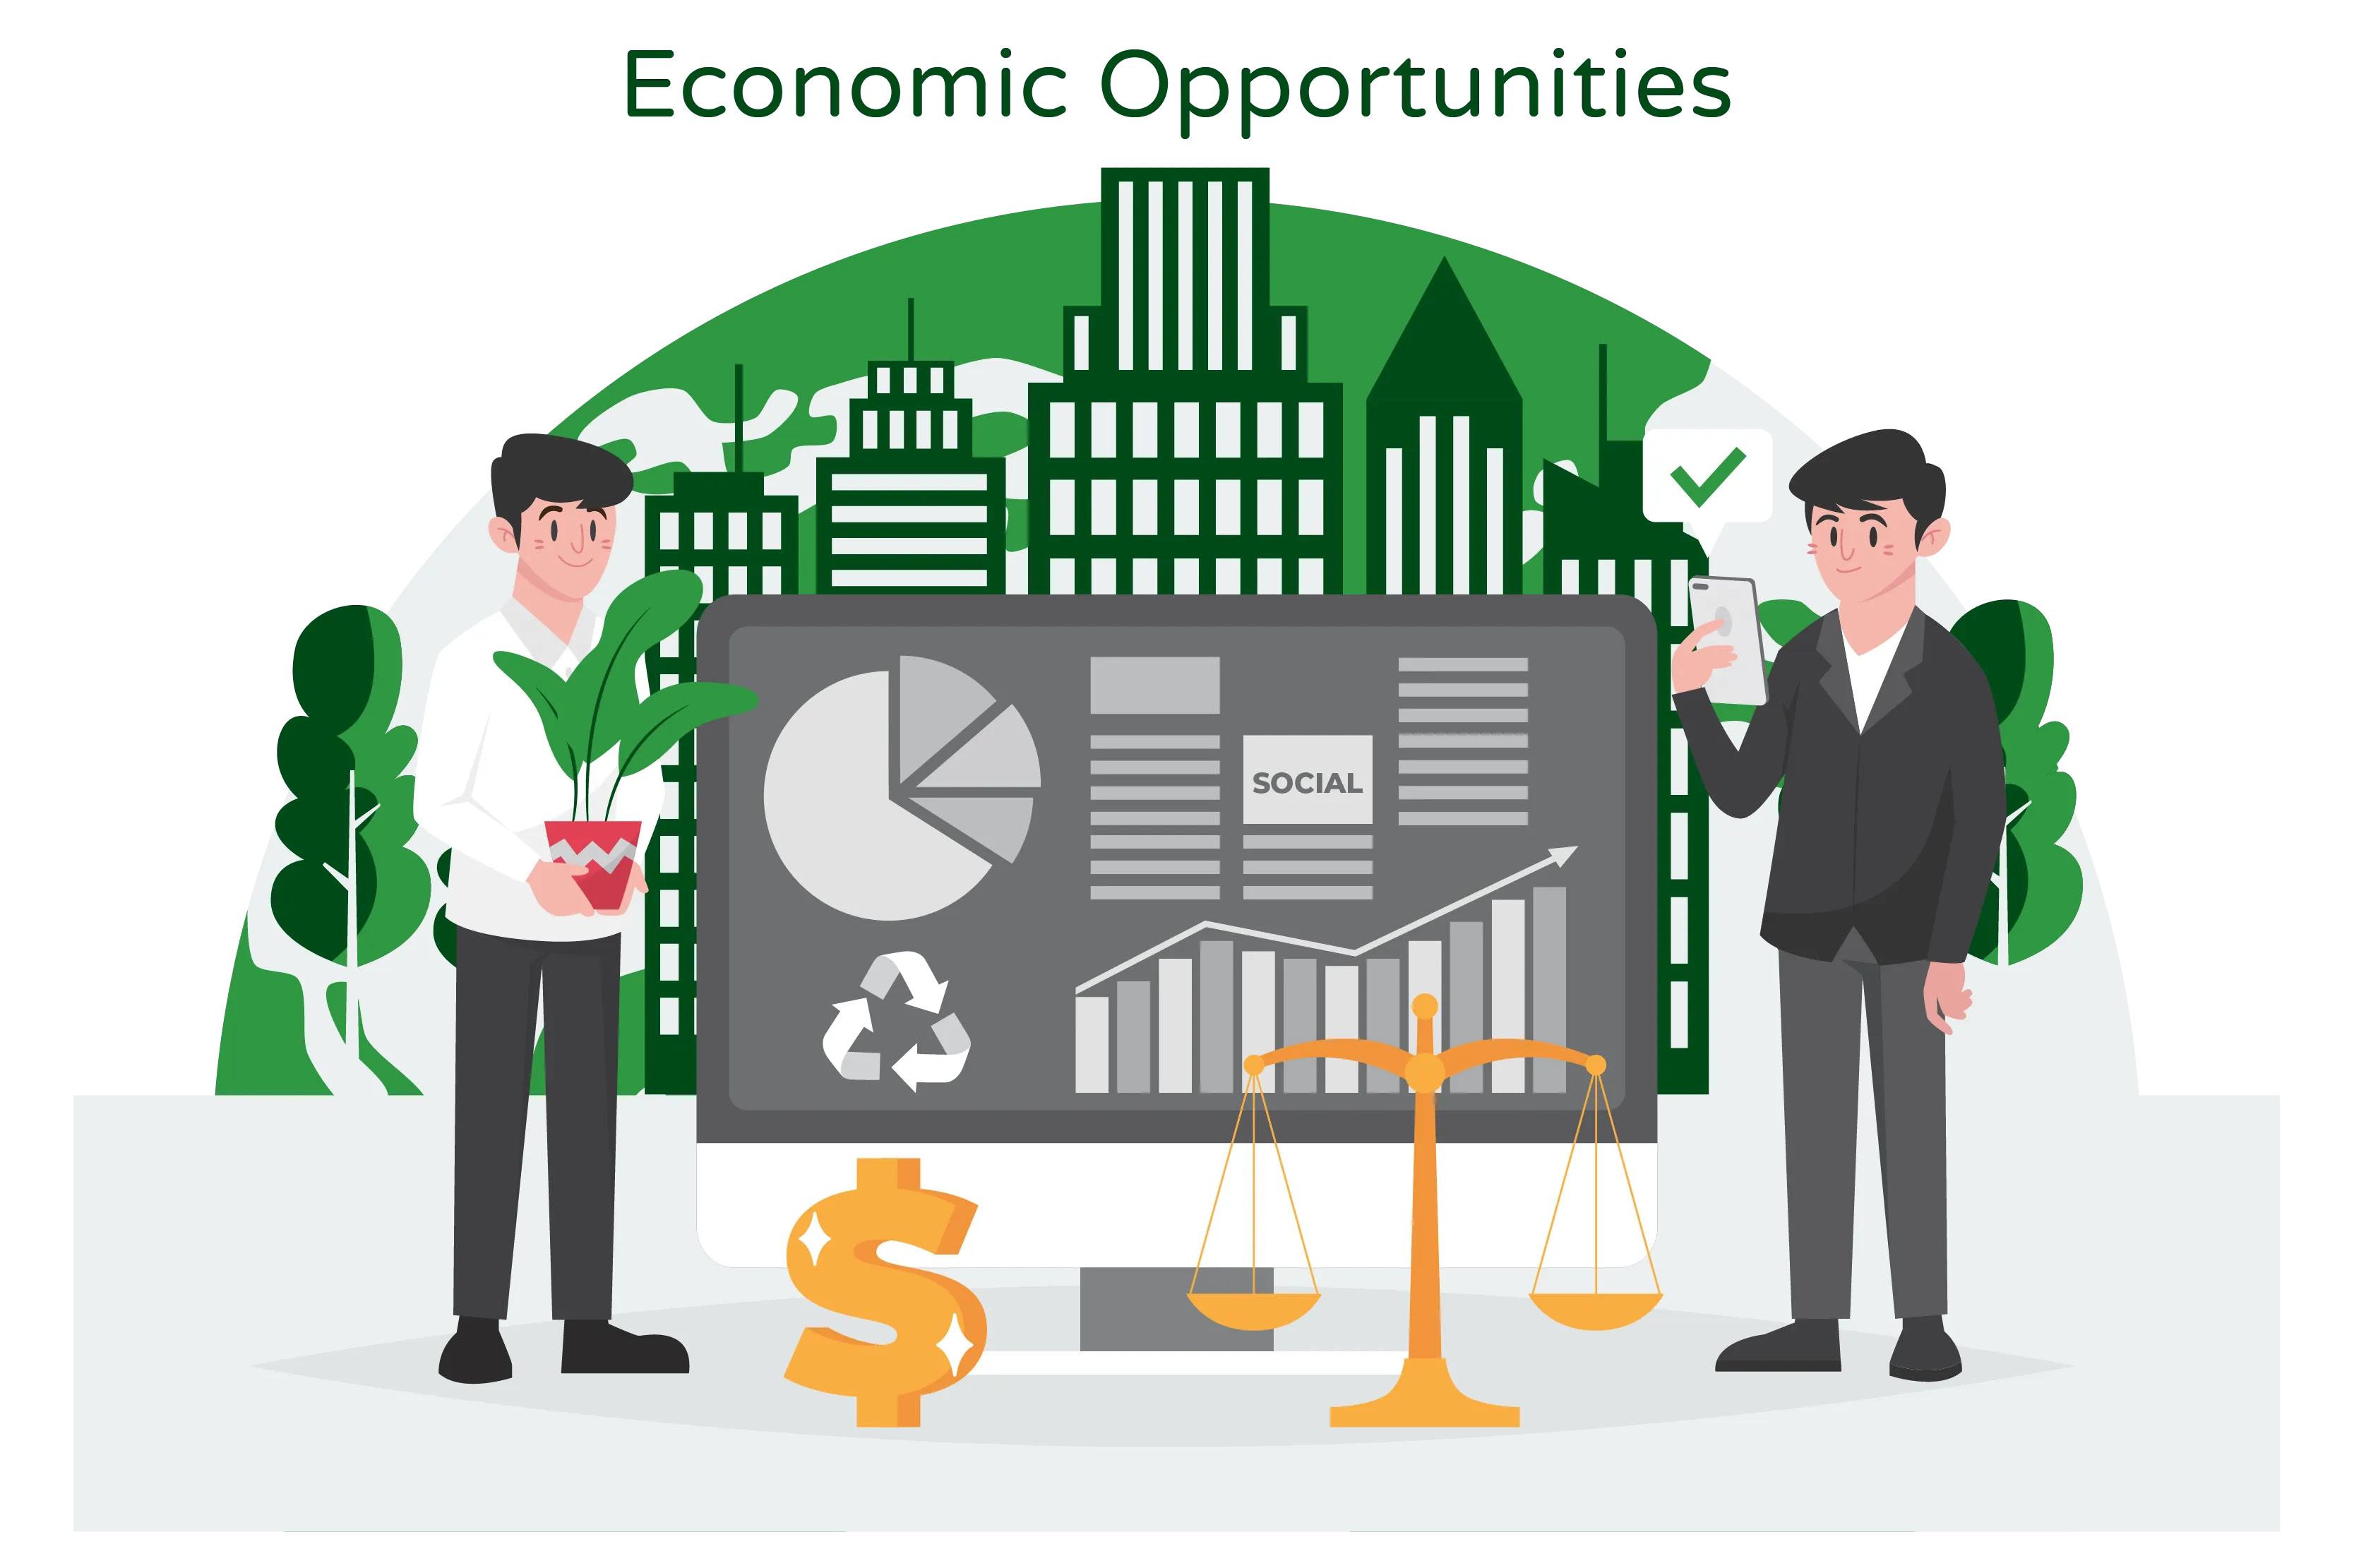 Illustration titled 'Economic Opportunities.' In the foreground, two men are depicted. One is holding a pot of plant, symbolizing environmental sustainability and green initiatives, while the other is holding a cell phone, representing technological advancements.  In the more front of the illustration, there is a sign of a dollar and a scale of equity, suggesting economic prosperity and fair distribution of resources. In the background, there are buildings and economic charts, indicating a growing economy and social opportunities.  The illustration conveys the idea that economic opportunities arise from a combination of environmental sustainability, technological advancements, and equitable distribution of resources. It symbolizes the potential for economic growth, prosperity, and social progress when these factors are integrated.  Overall, the illustration visualizes the positive relationship between economic opportunities, environmental consciousness, and technological advancements, highlighting the potential for a thriving economy with social inclusivity.